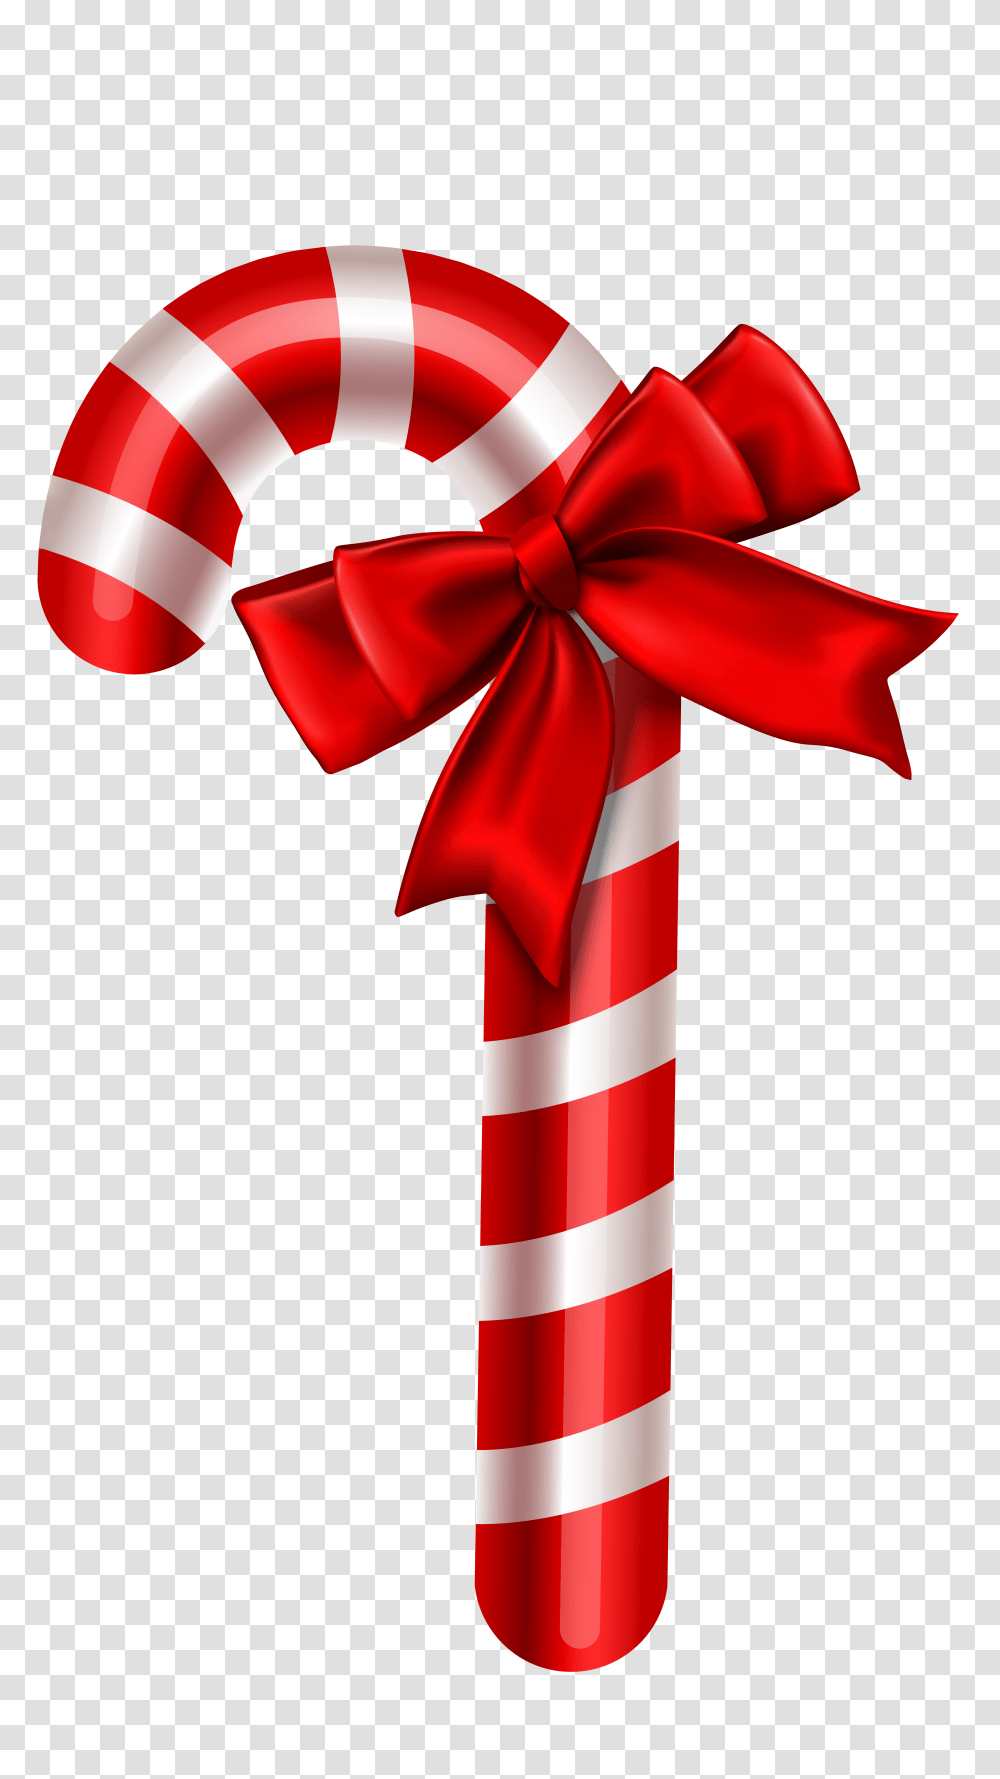 Christmas Candy Images Free Download Christmas Candy, Food, Sweets, Confectionery, Lollipop Transparent Png